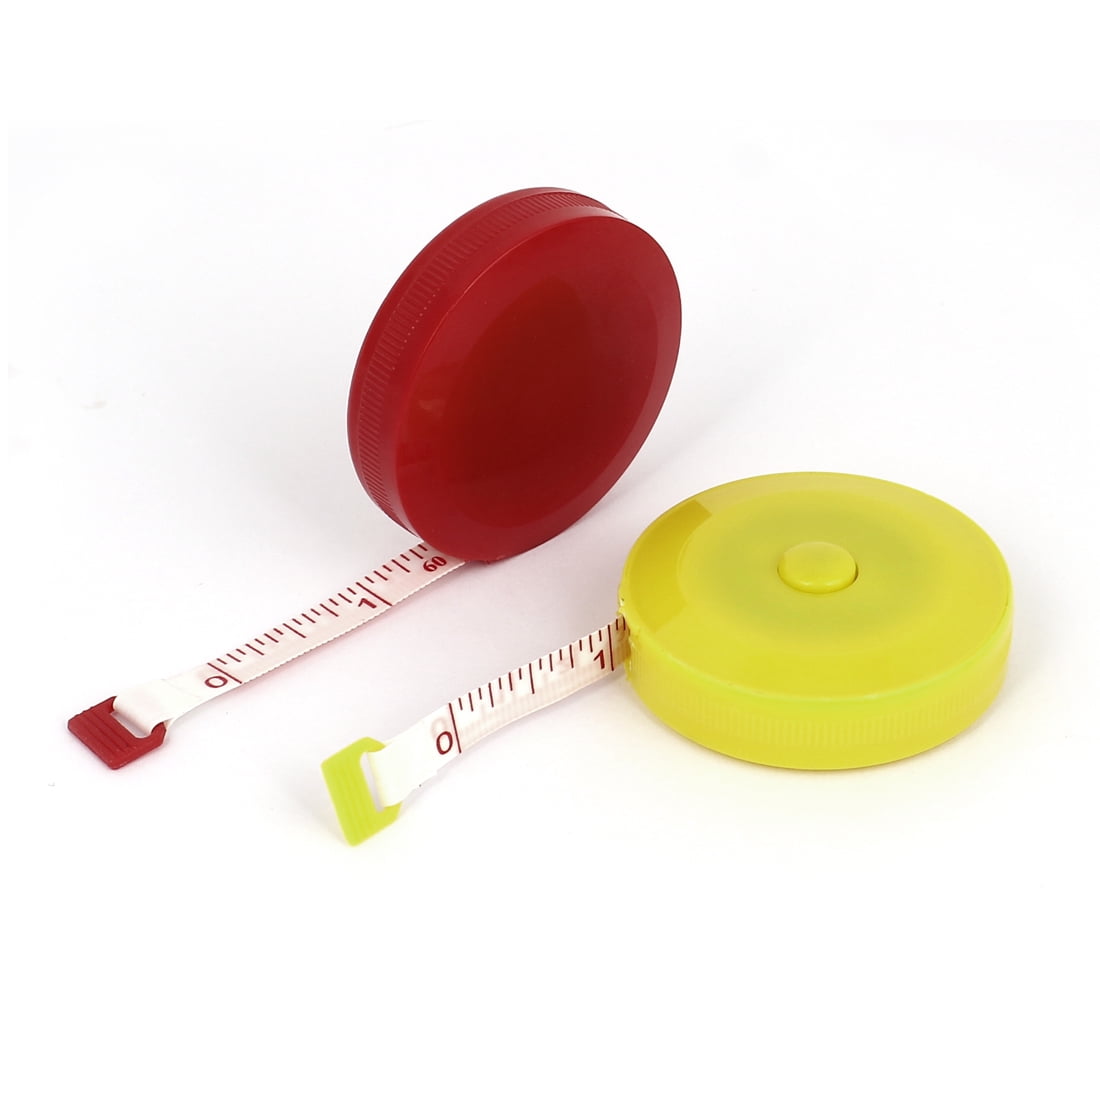 150cm 60inch Retractable Ruler Tape Measure Sewing Cloth Dieting Tailor